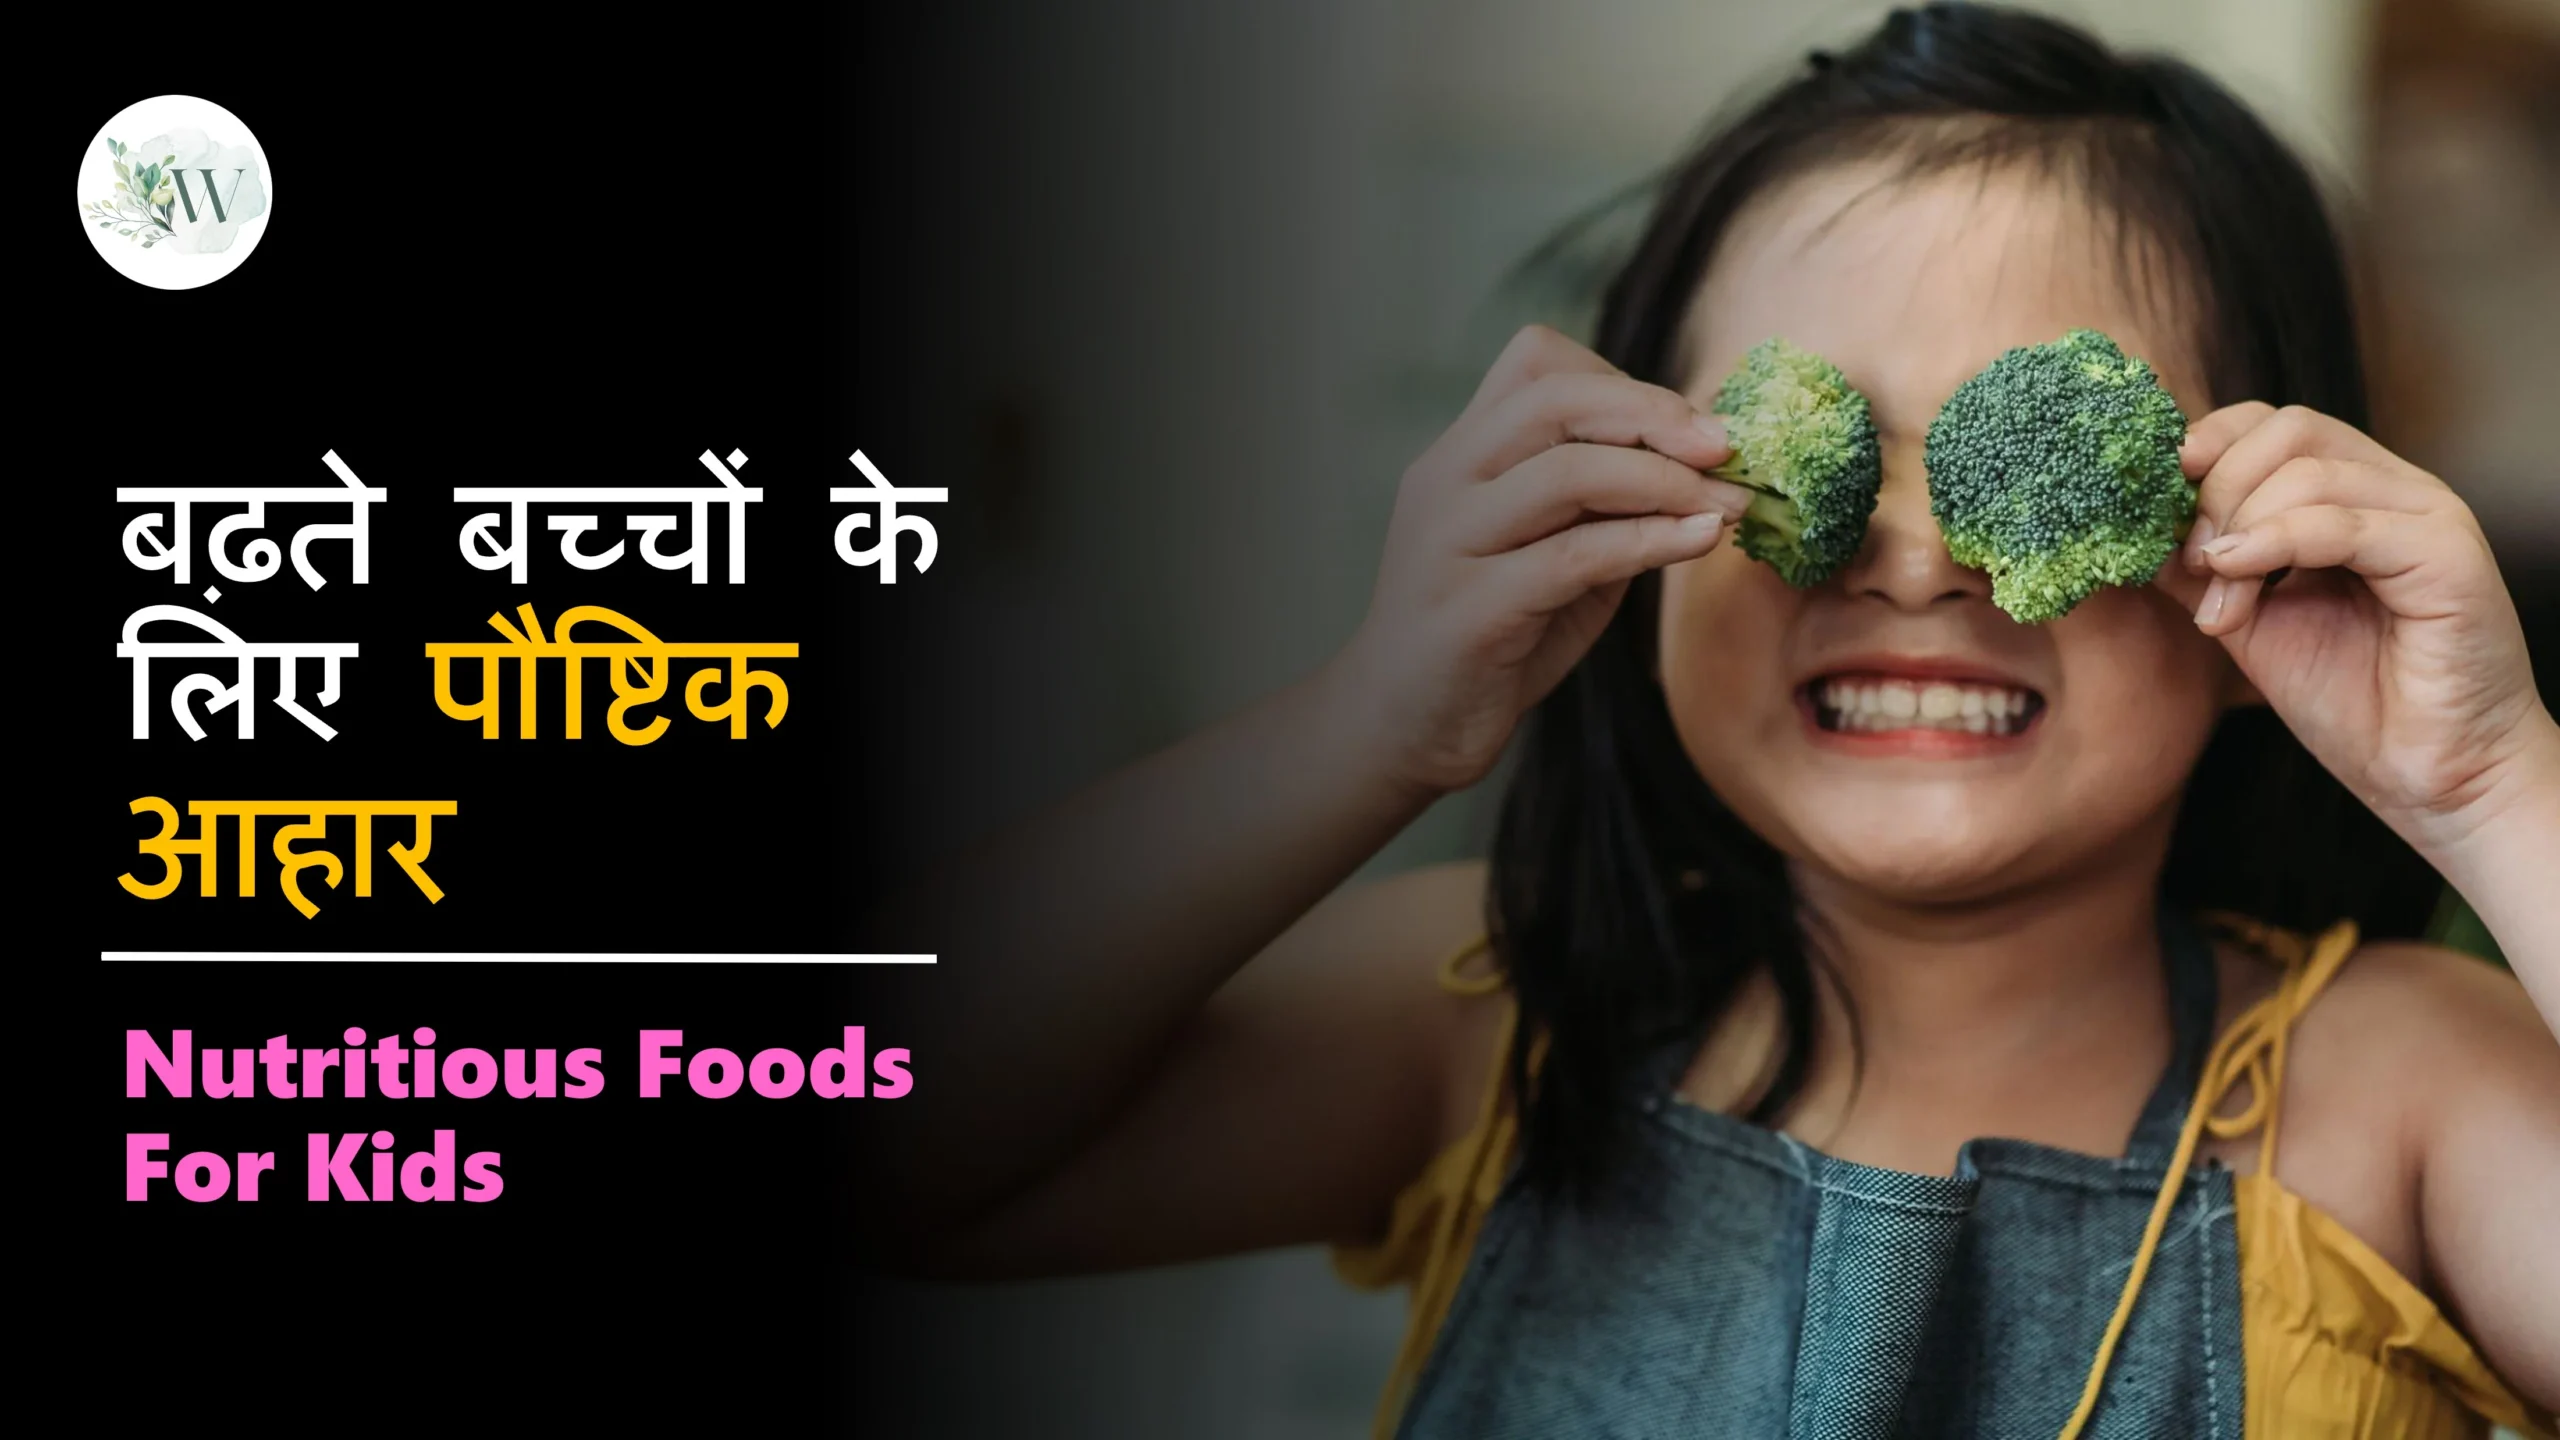 Nutritious Foods For Kids in Hindi